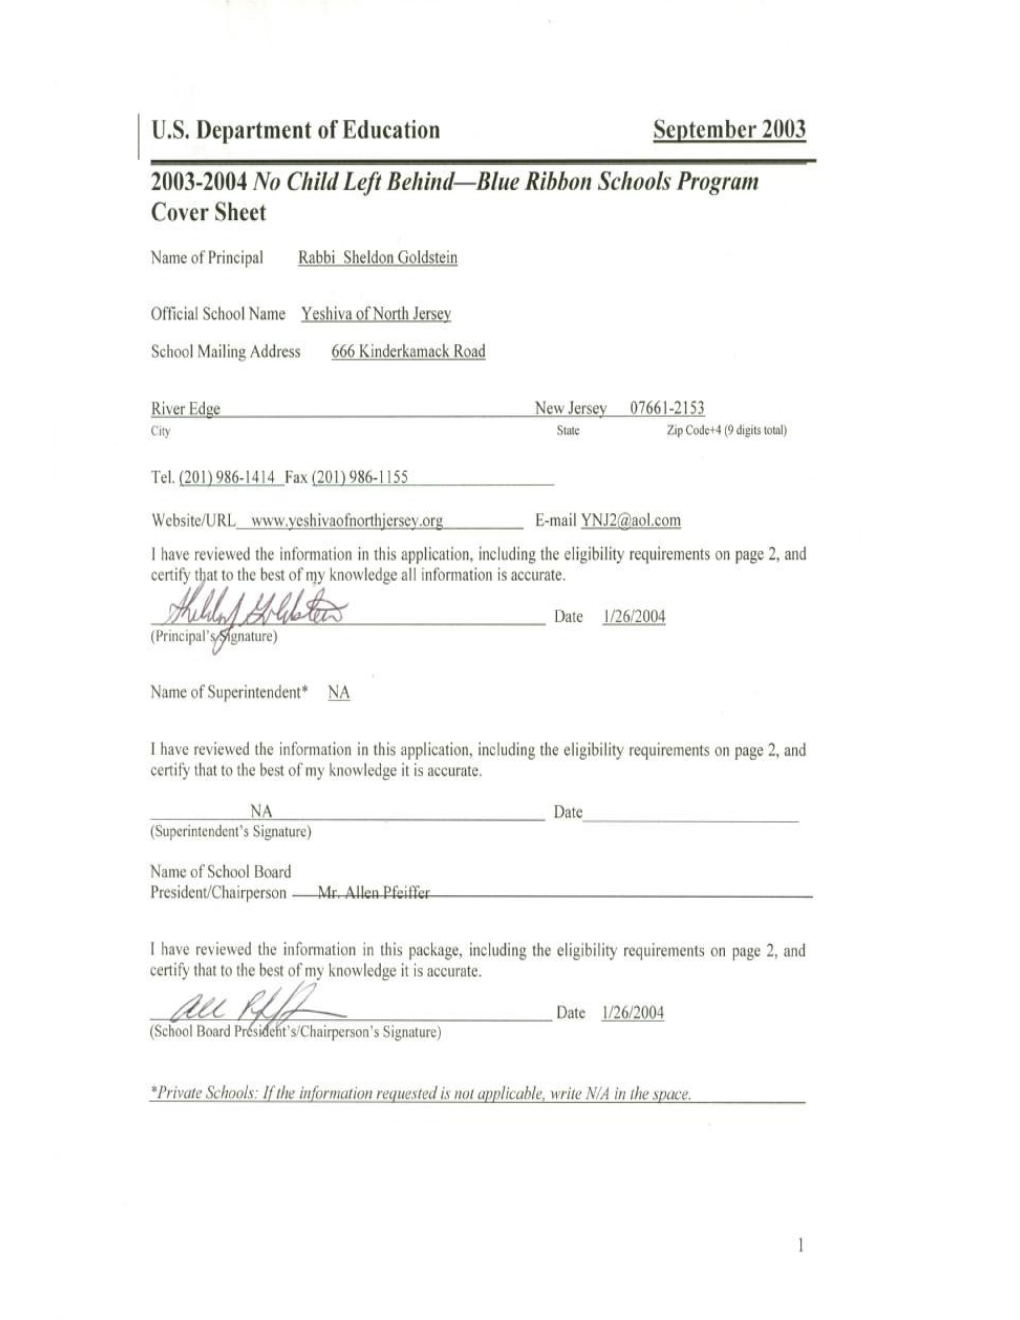 Yeshiva of North Jersey 2004 No Child Left Behind-Blue Ribbon School Application (Msword)